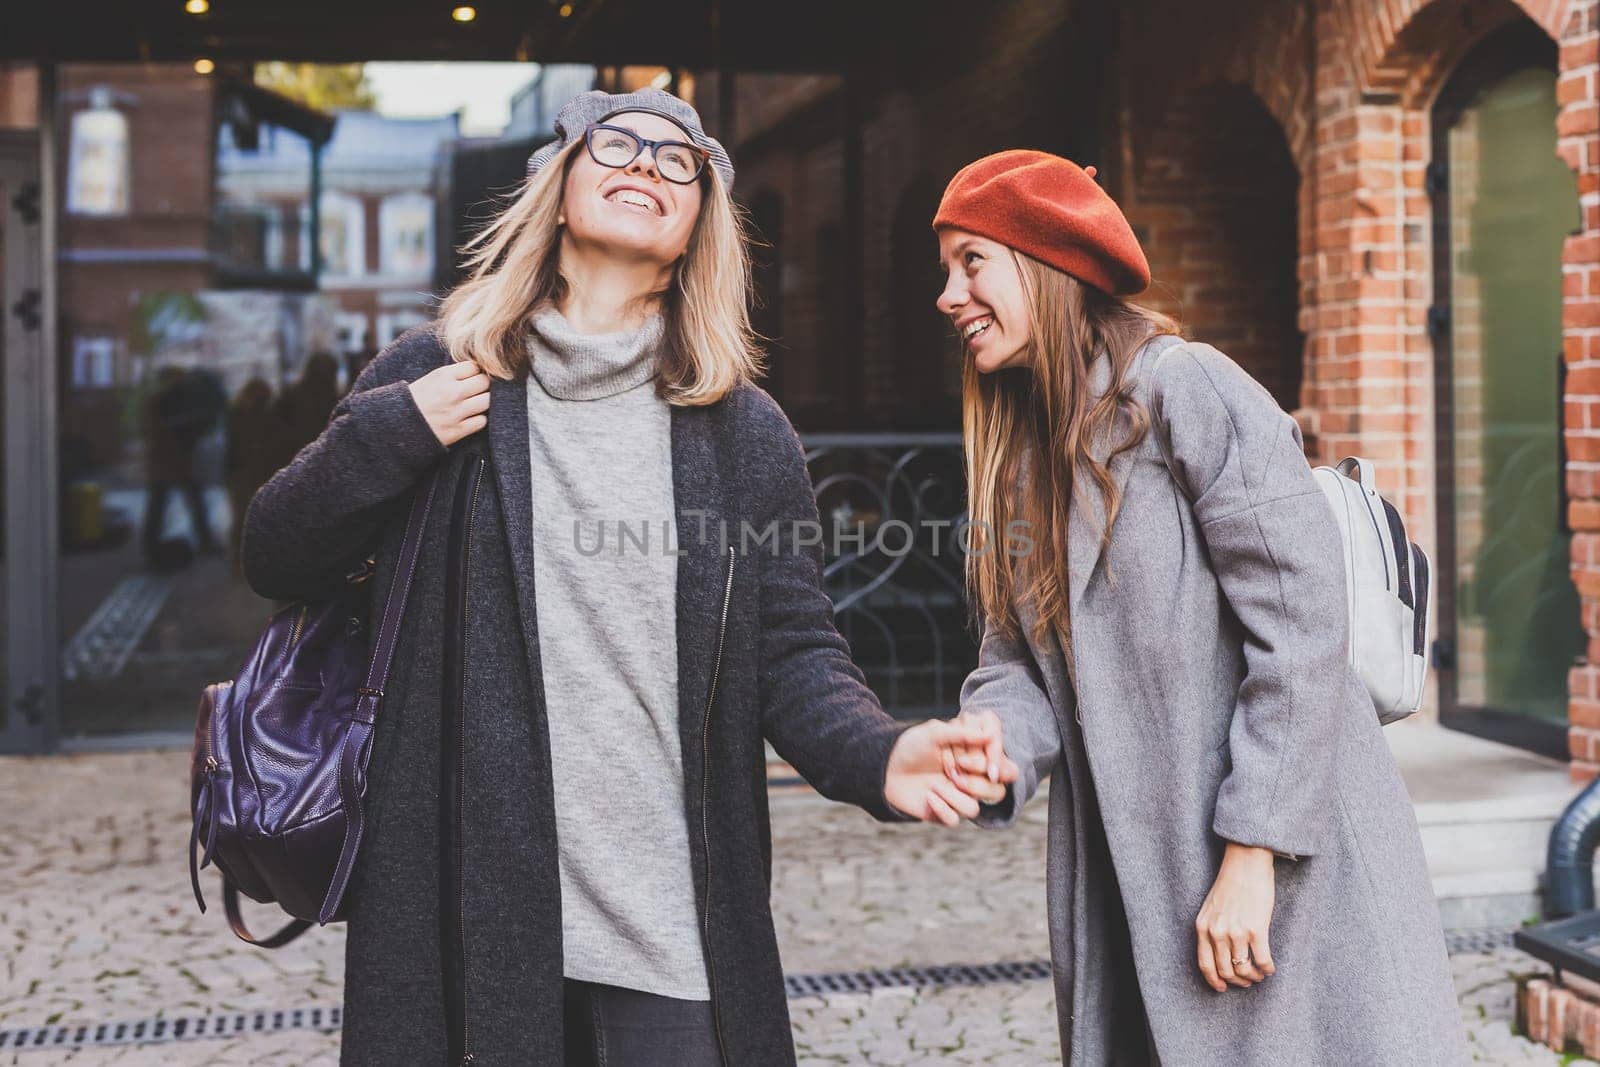 Young pretty girls friends having fun outdoor in autumn evening in city laughing and going crazy fooling on the street - friendship and funny people concept by Satura86